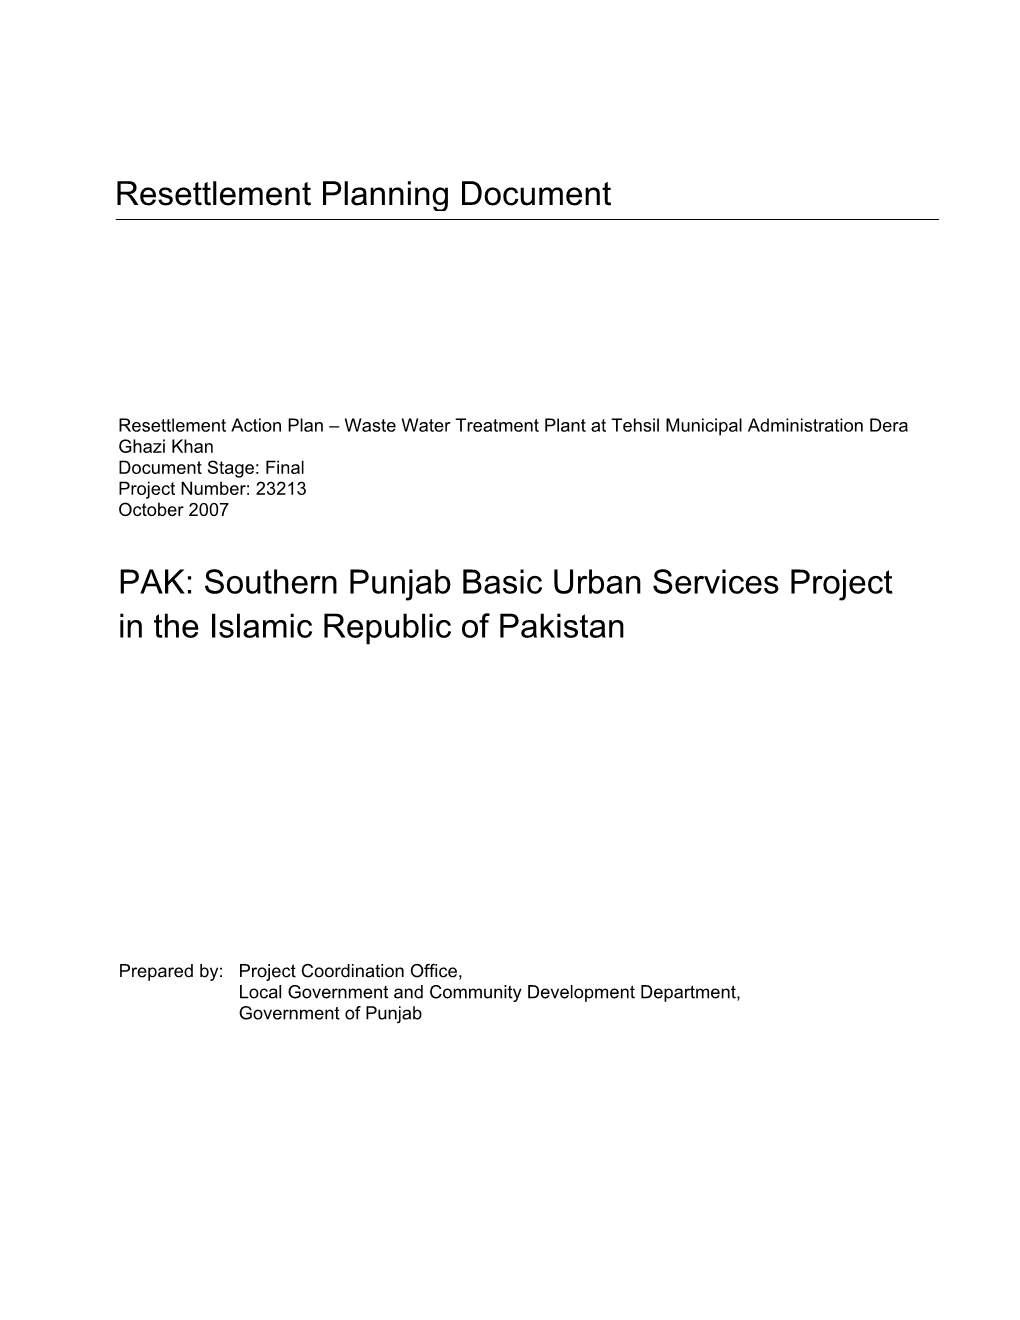 Southern Punjab Basic Urban Services Project in the Islamic Republic of Pakistan